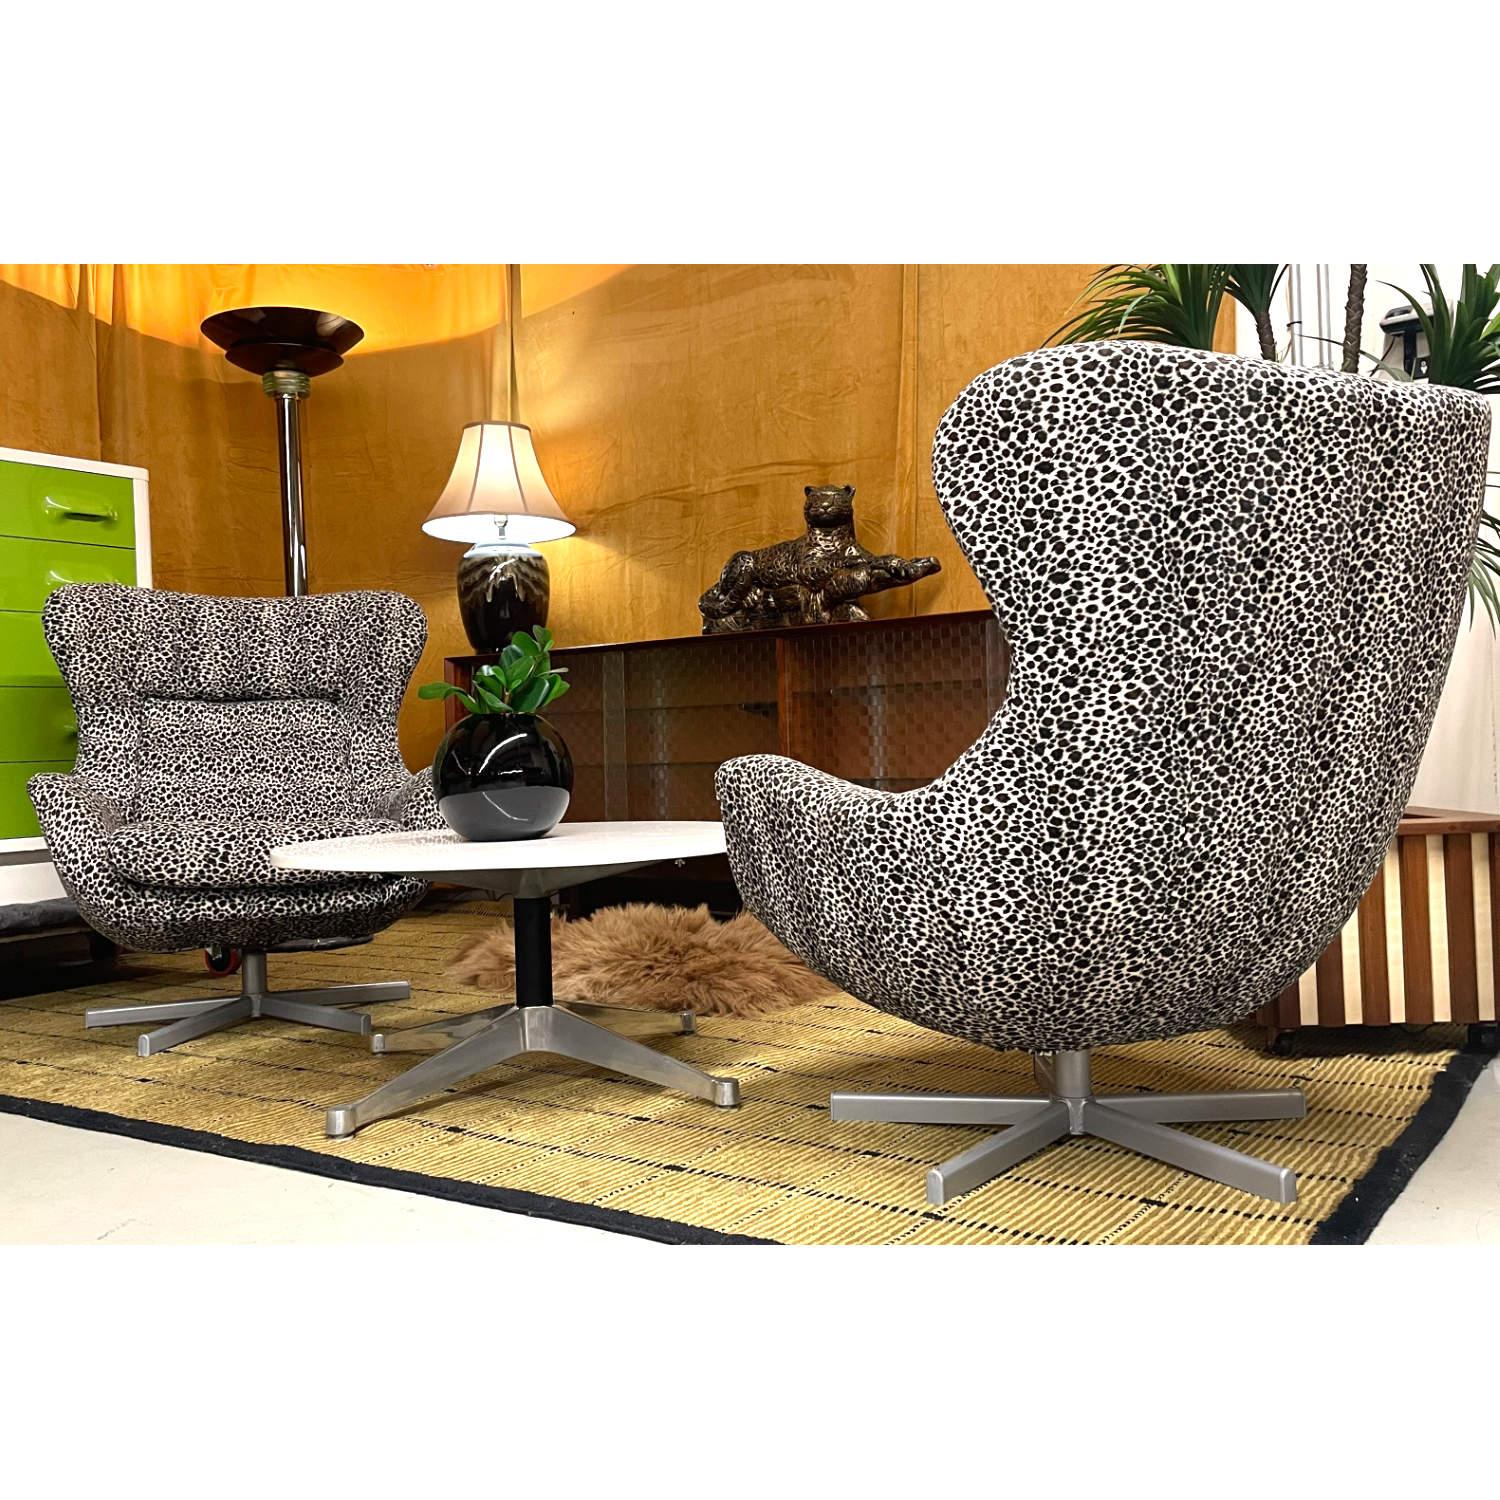 Pair of Vintage Fuzzy Leopard Arne Jacobsen Egg Chair Style Swivel Chairs In Good Condition For Sale In Chattanooga, TN